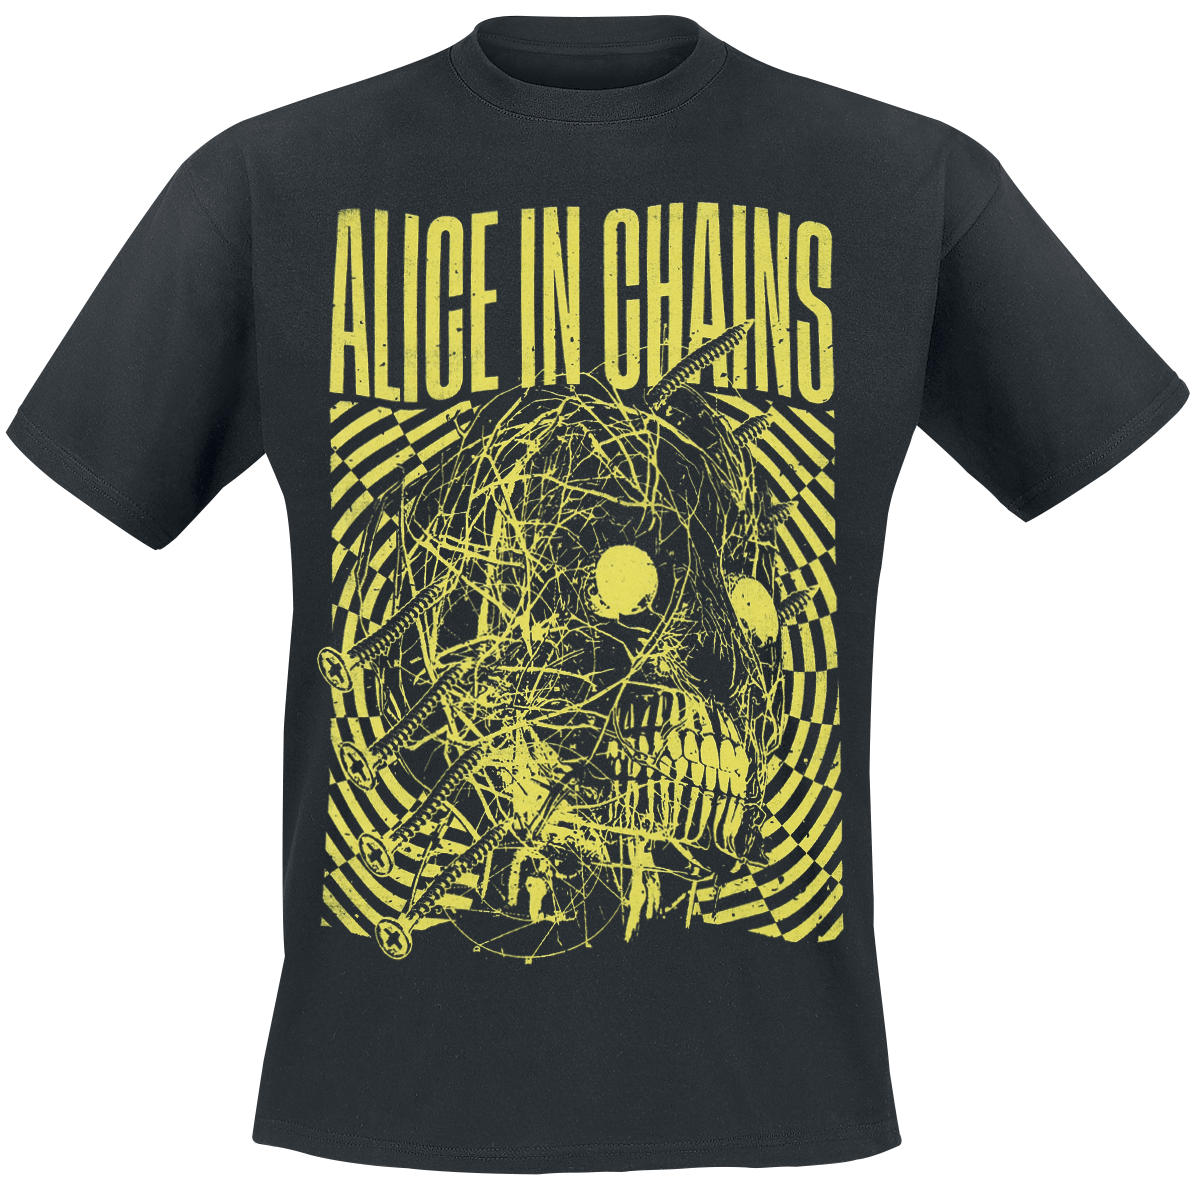 Alice In Chains - Head Creep - T-Shirt - black image